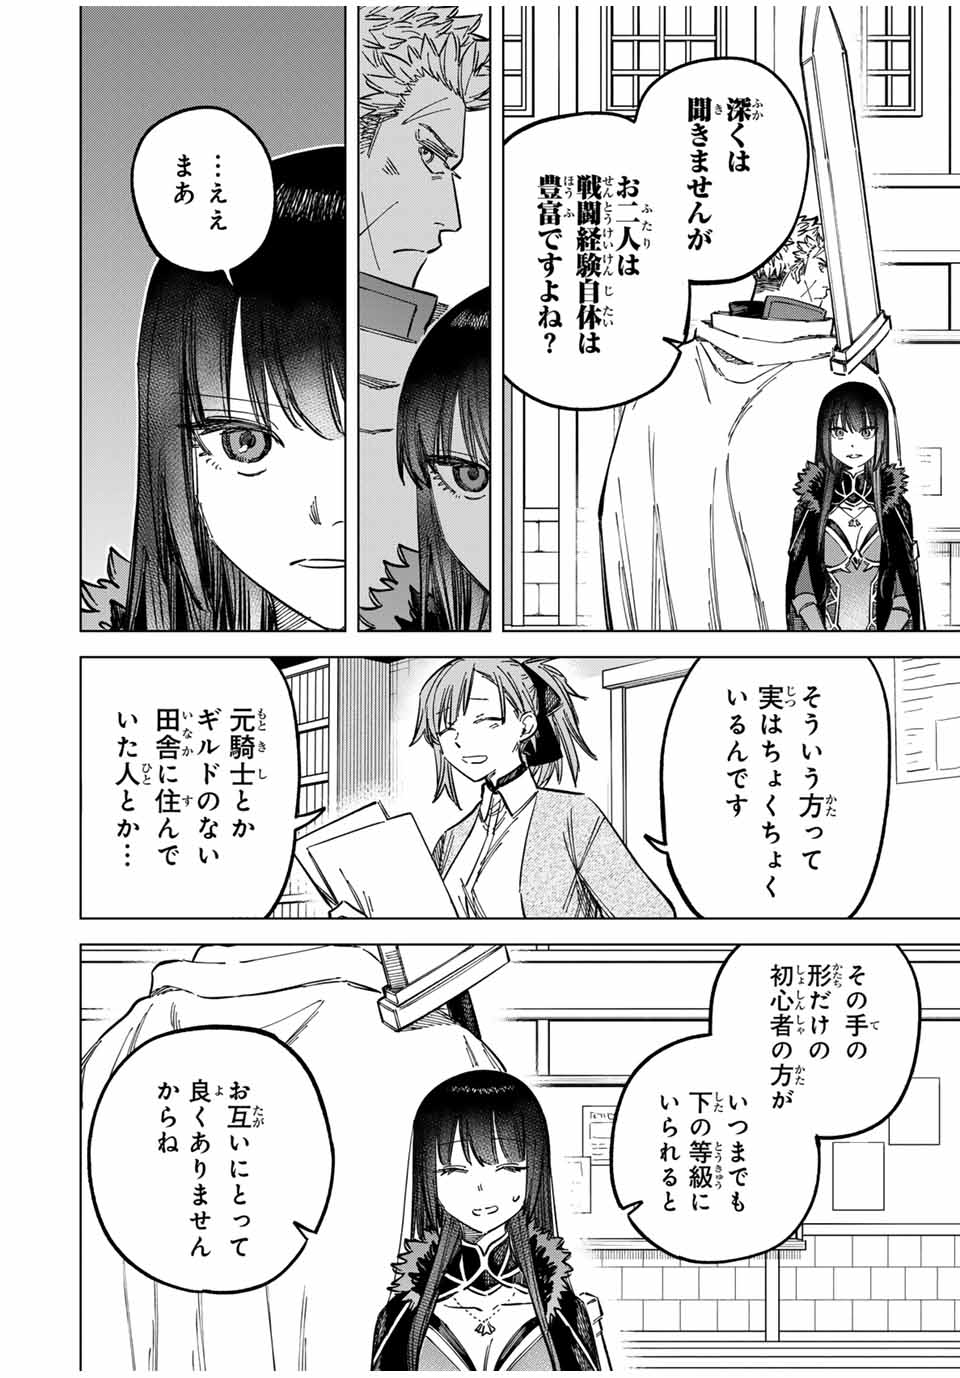 Witch and Mercenary 魔女と傭兵 第10話 - Page 4